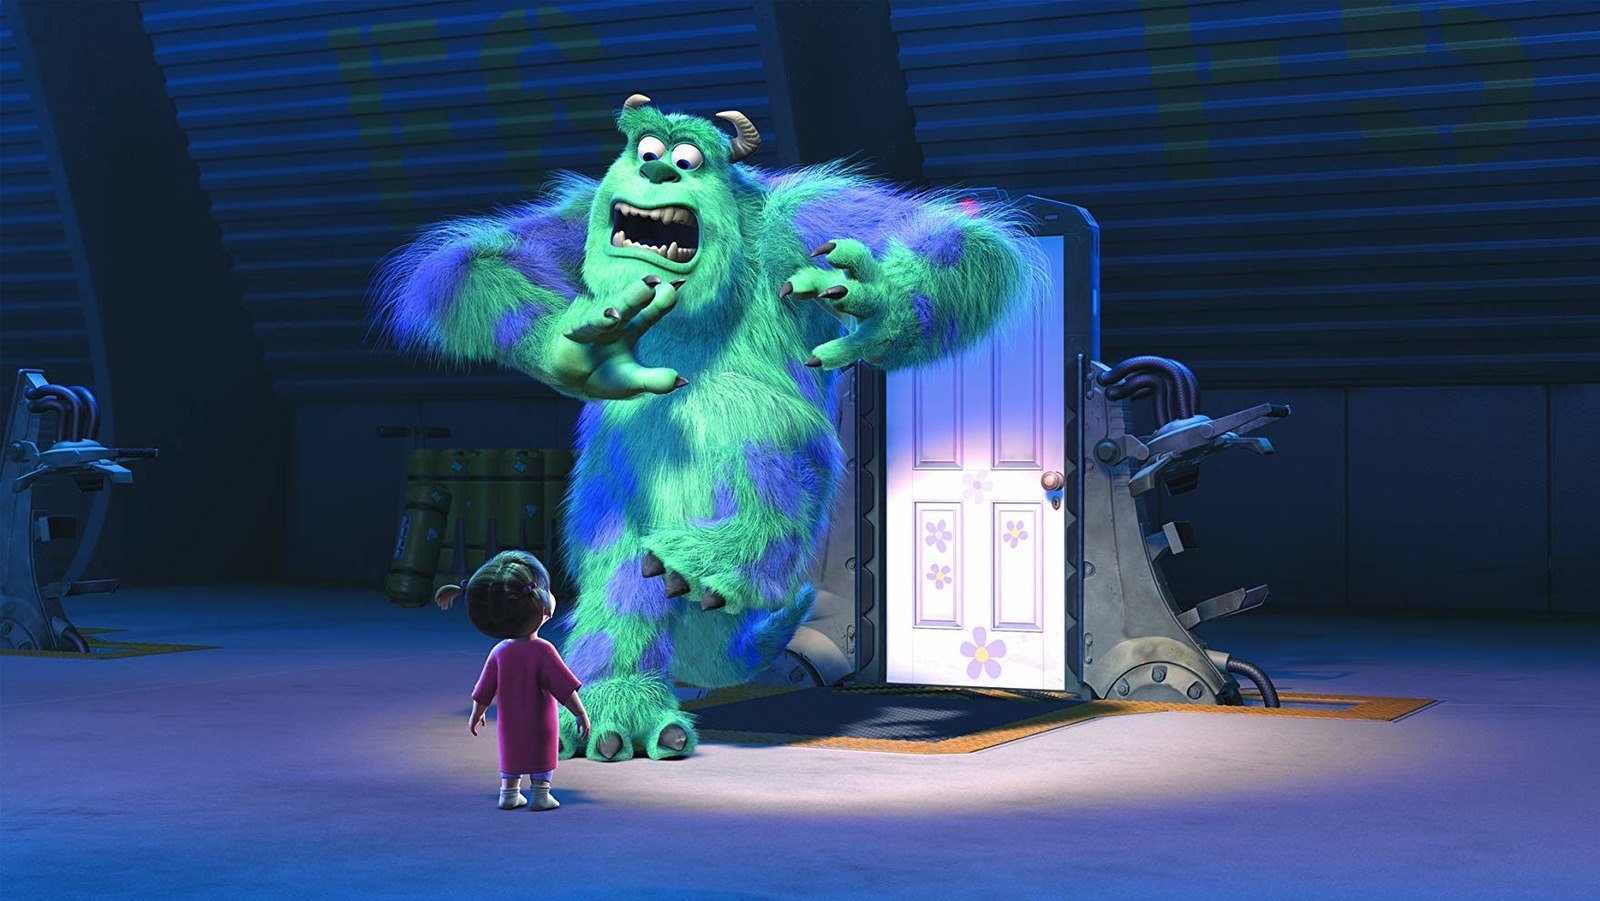 Sully from monsters inc as a human